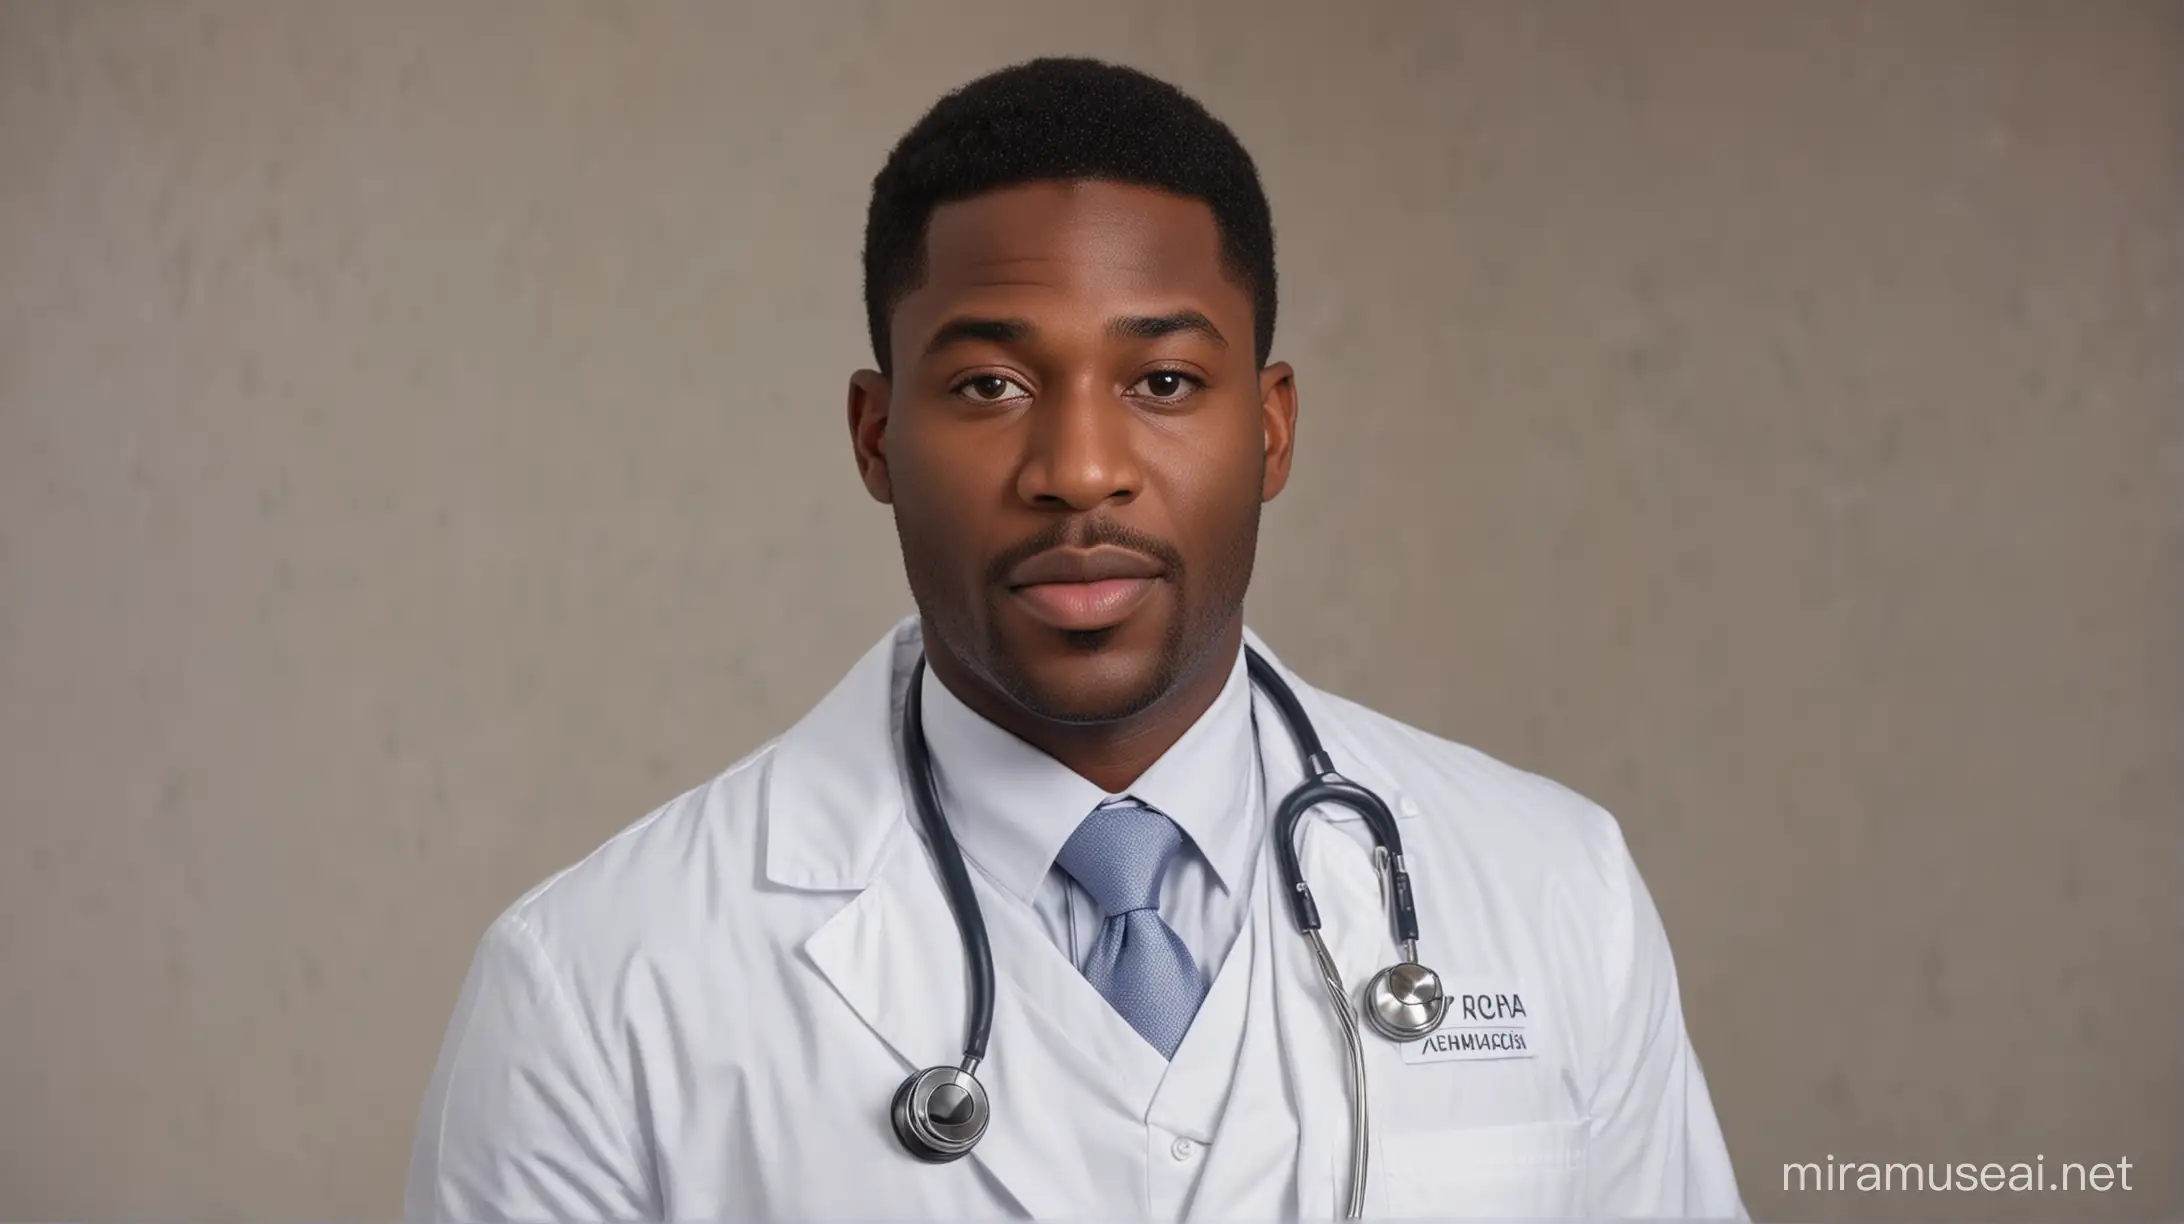 Professional Black Doctor Speaking to Camera in White Coat with Stethoscope